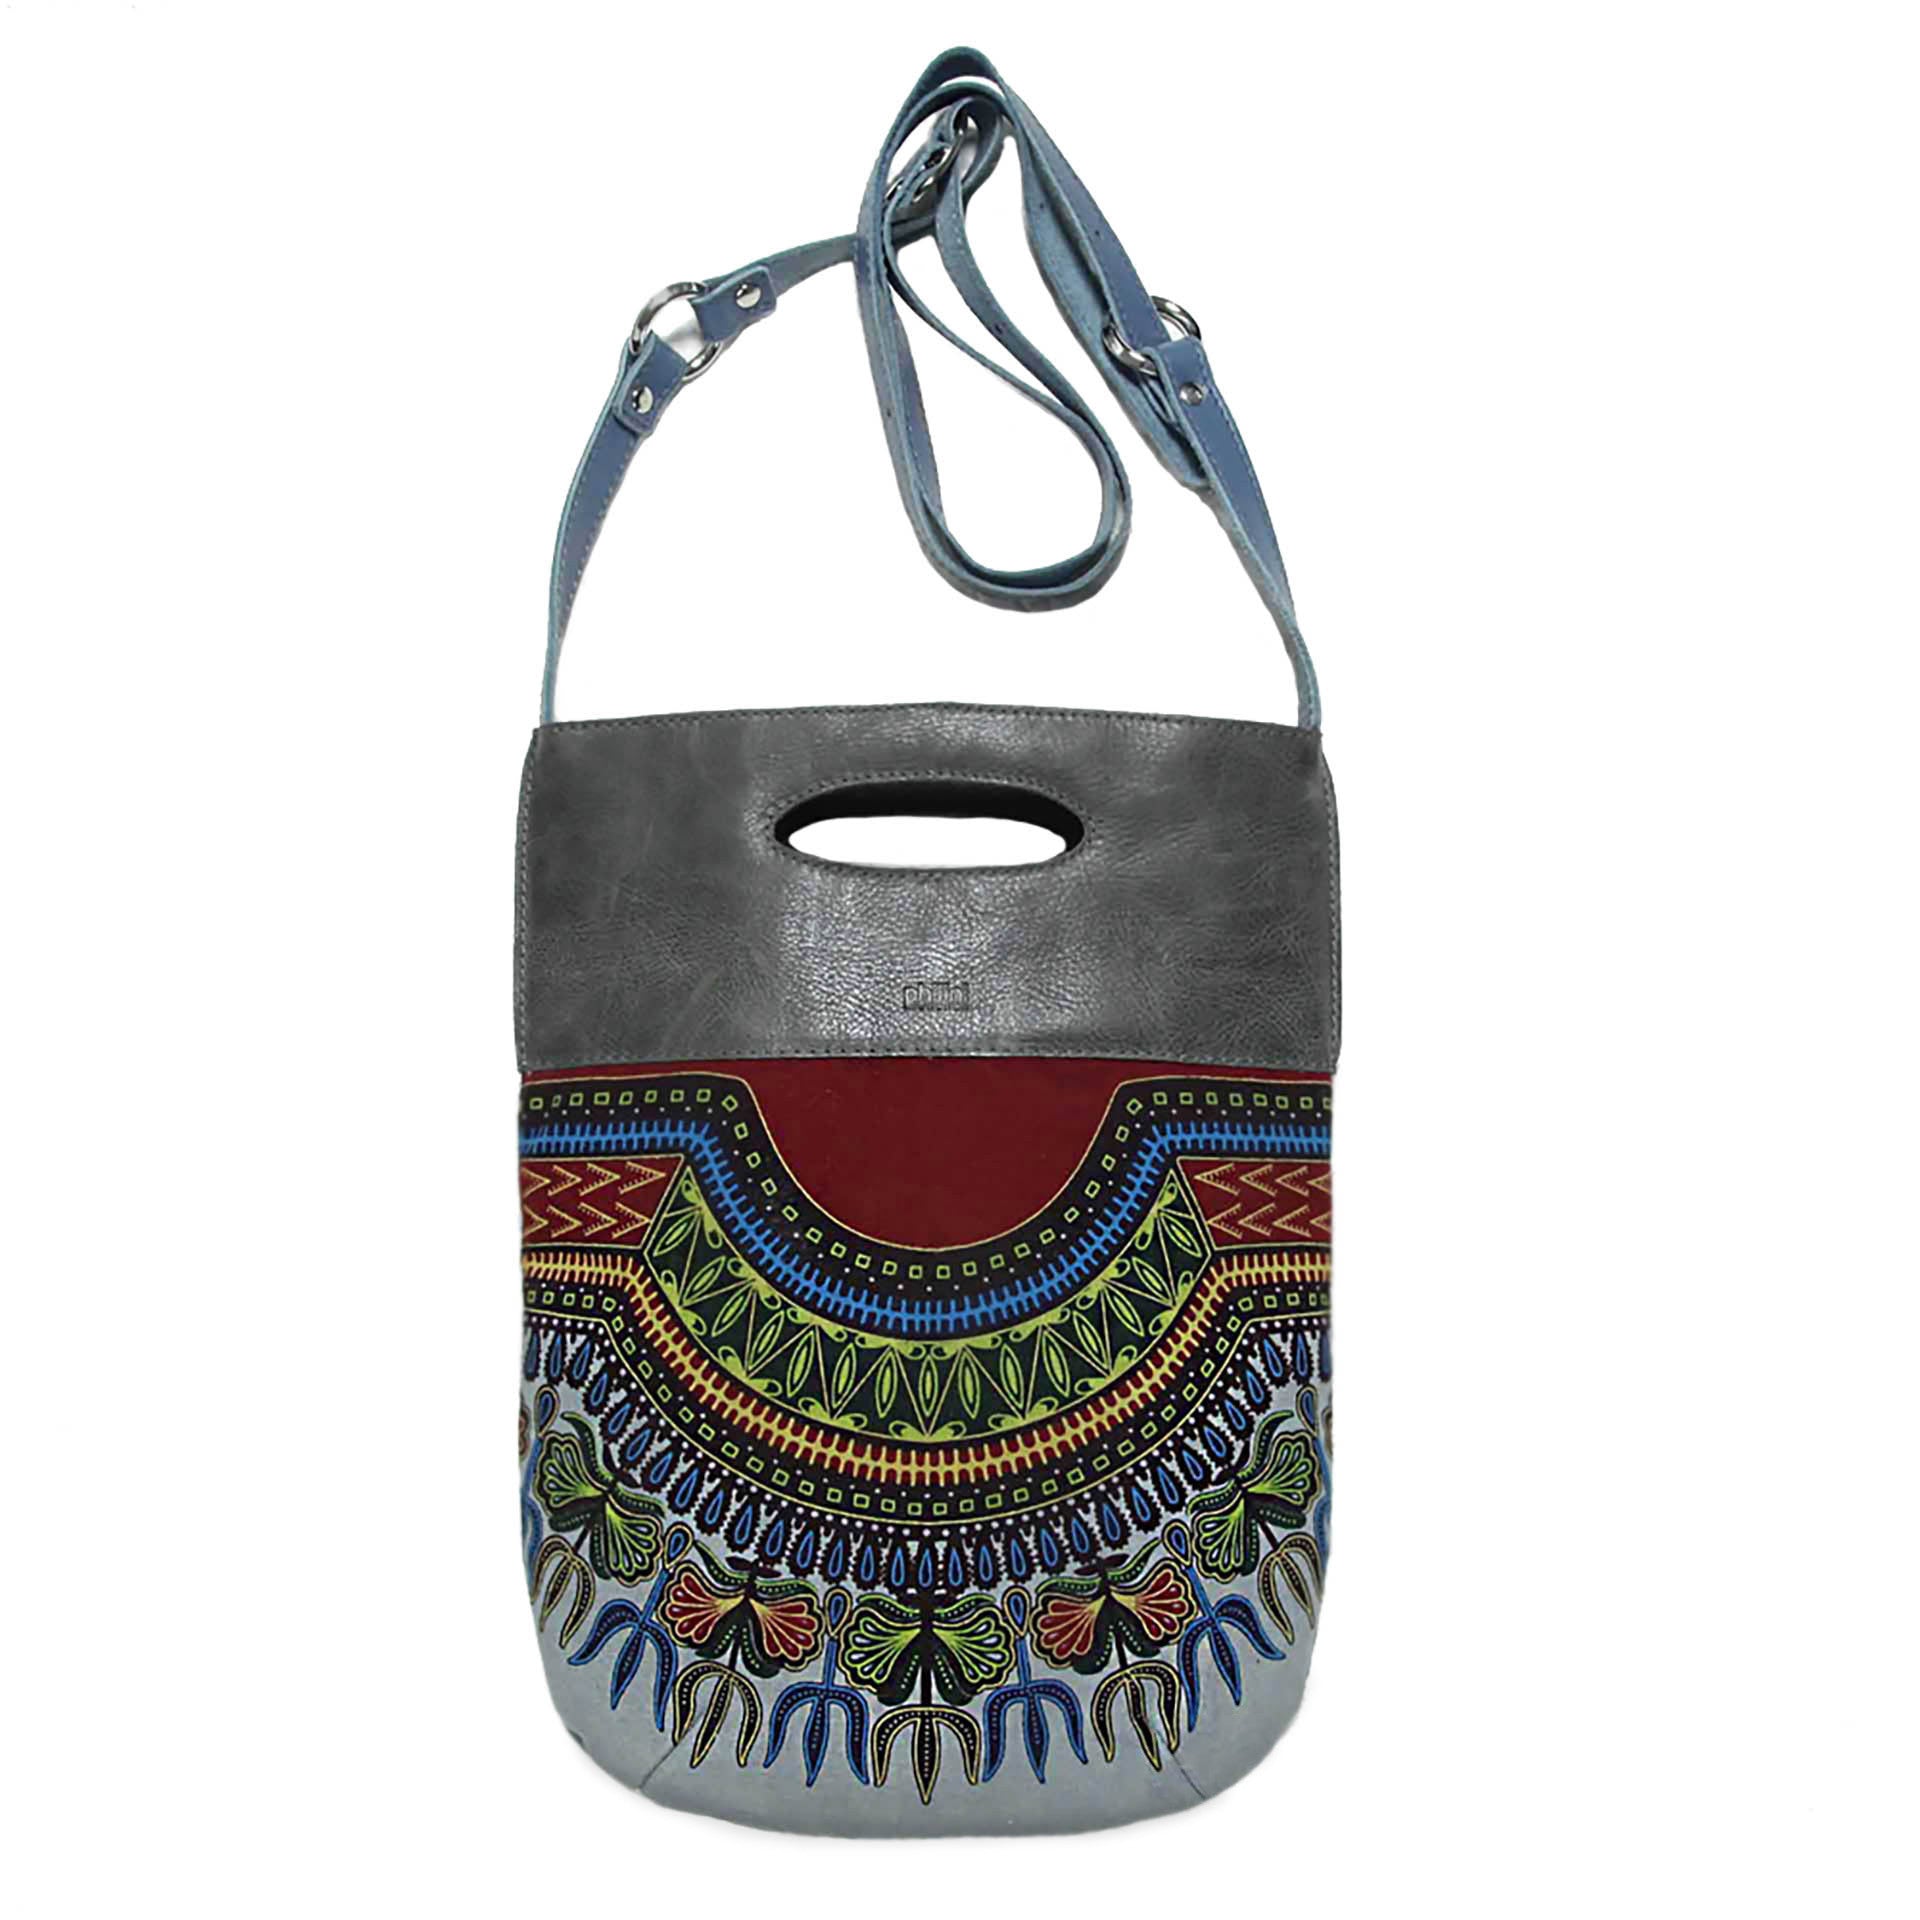 PHILINI BAGS Crossbody Bag African Style - Ina